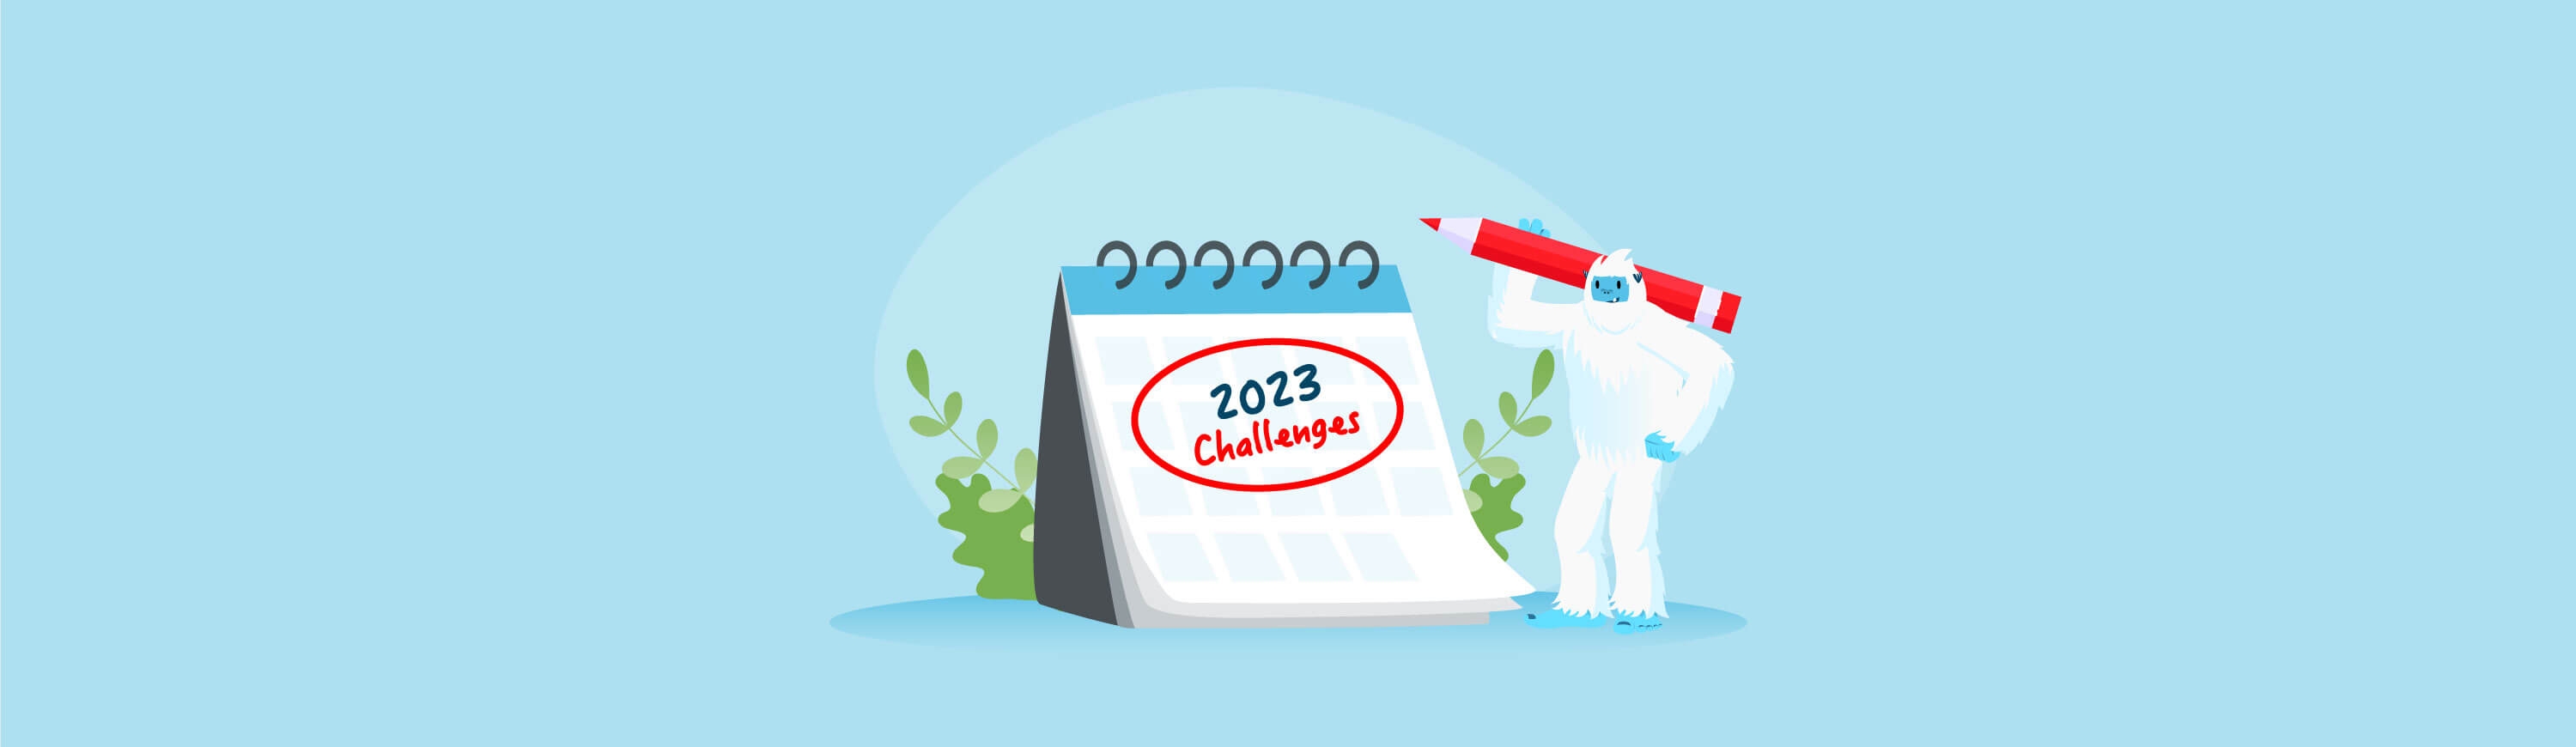 Illustration of Carl the Yeti standing next to a huge calendar that says "2023 Challenges."